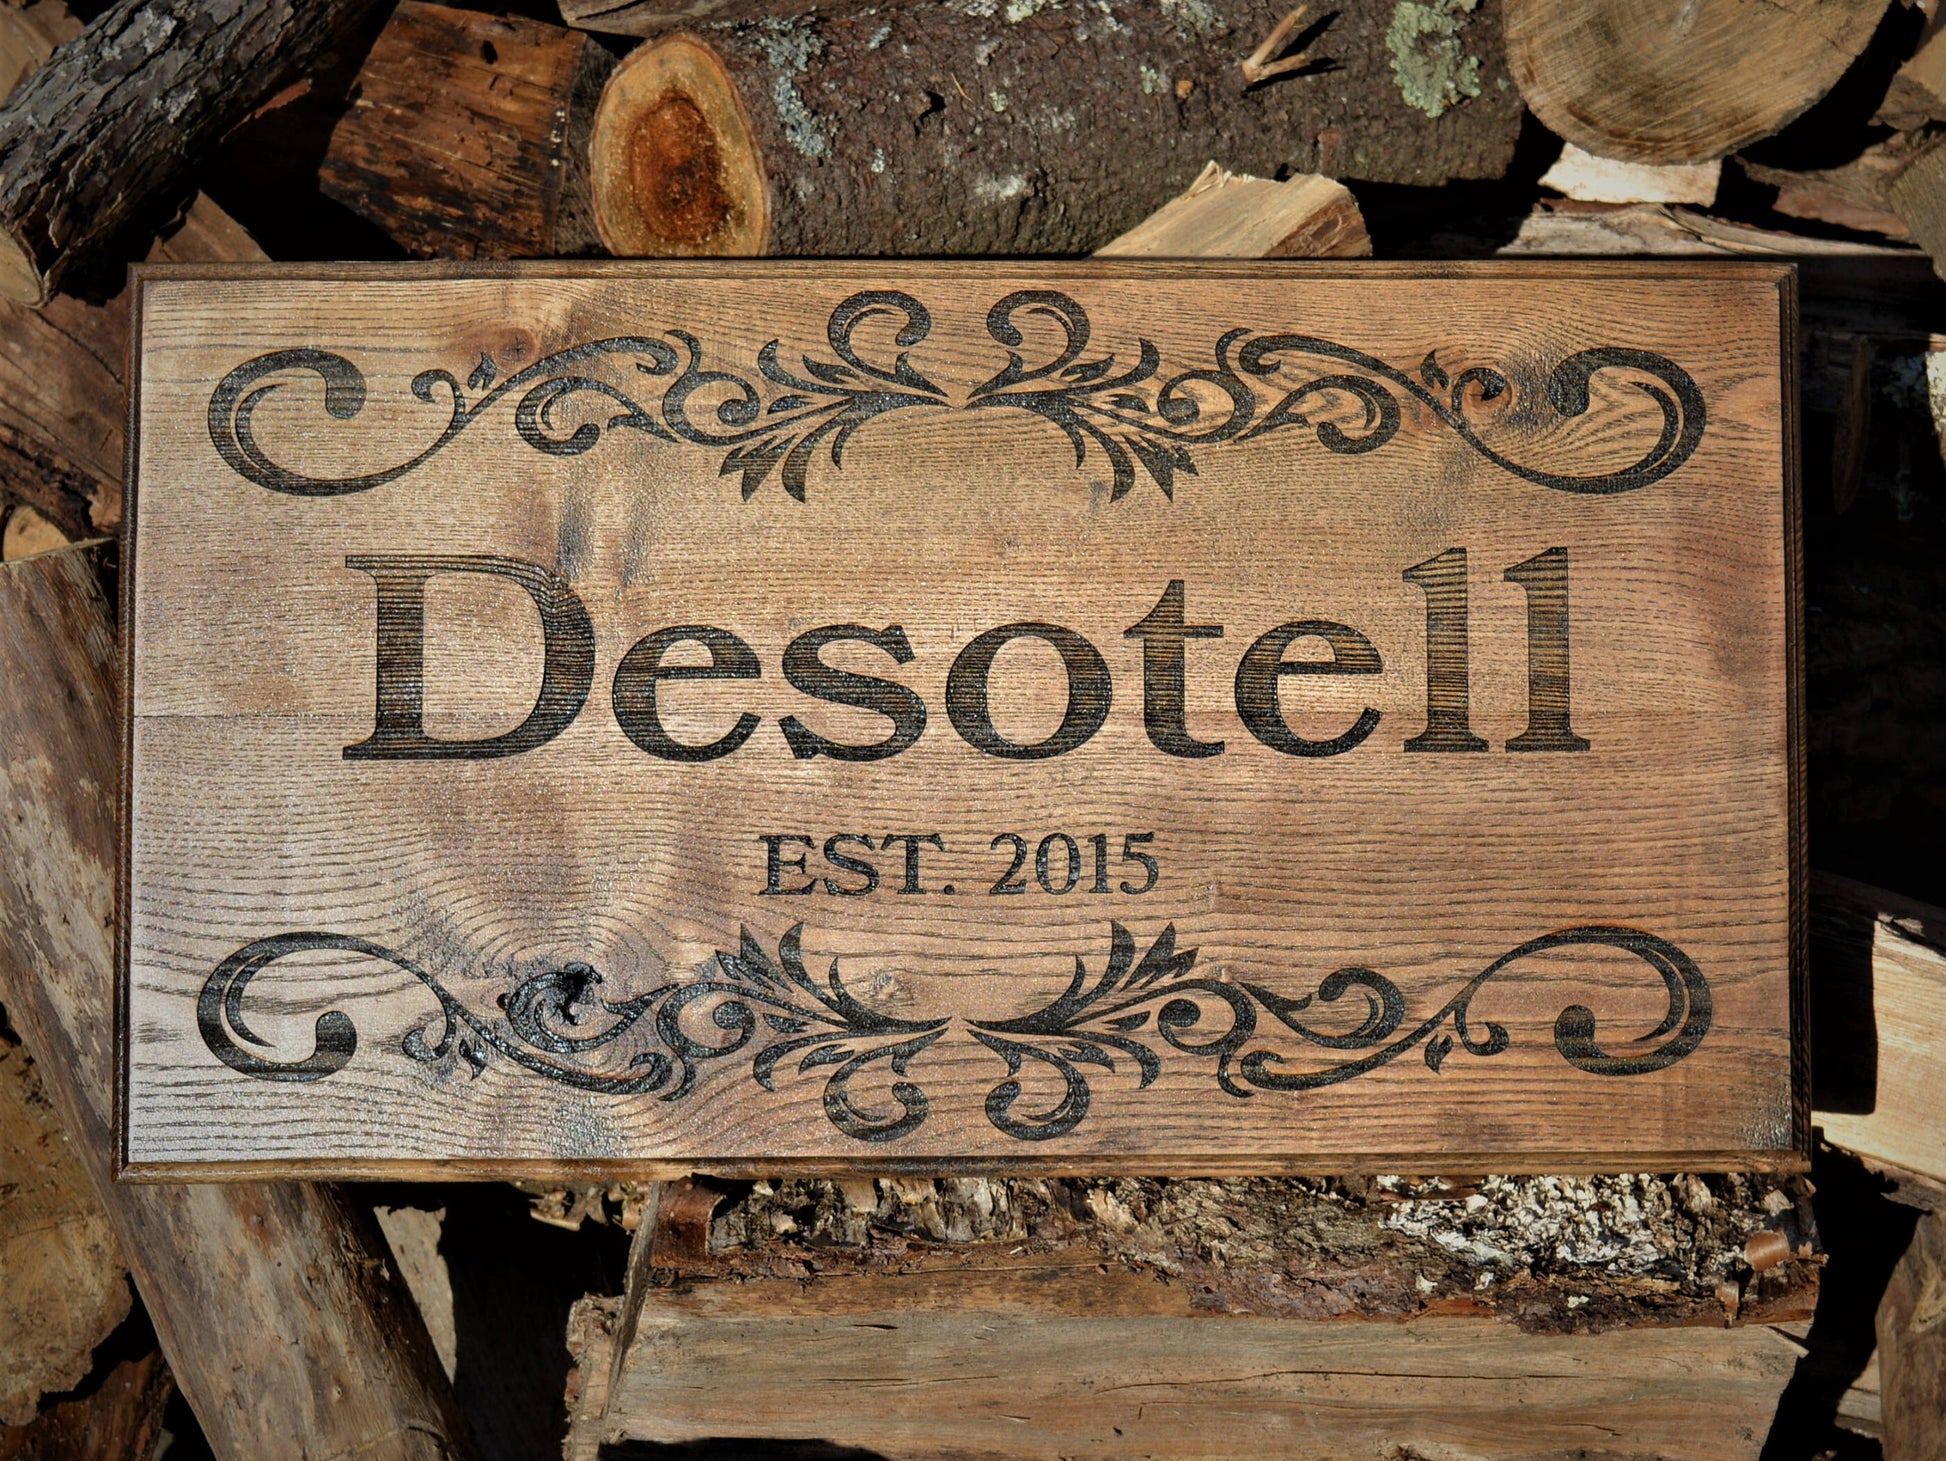 ENGRAVED Wood Sign with Last Name, HardWood, High Quality, Custom Name Sign, Personalized Rustic, Family, Outdoor Sign, House Camp Sign Gift